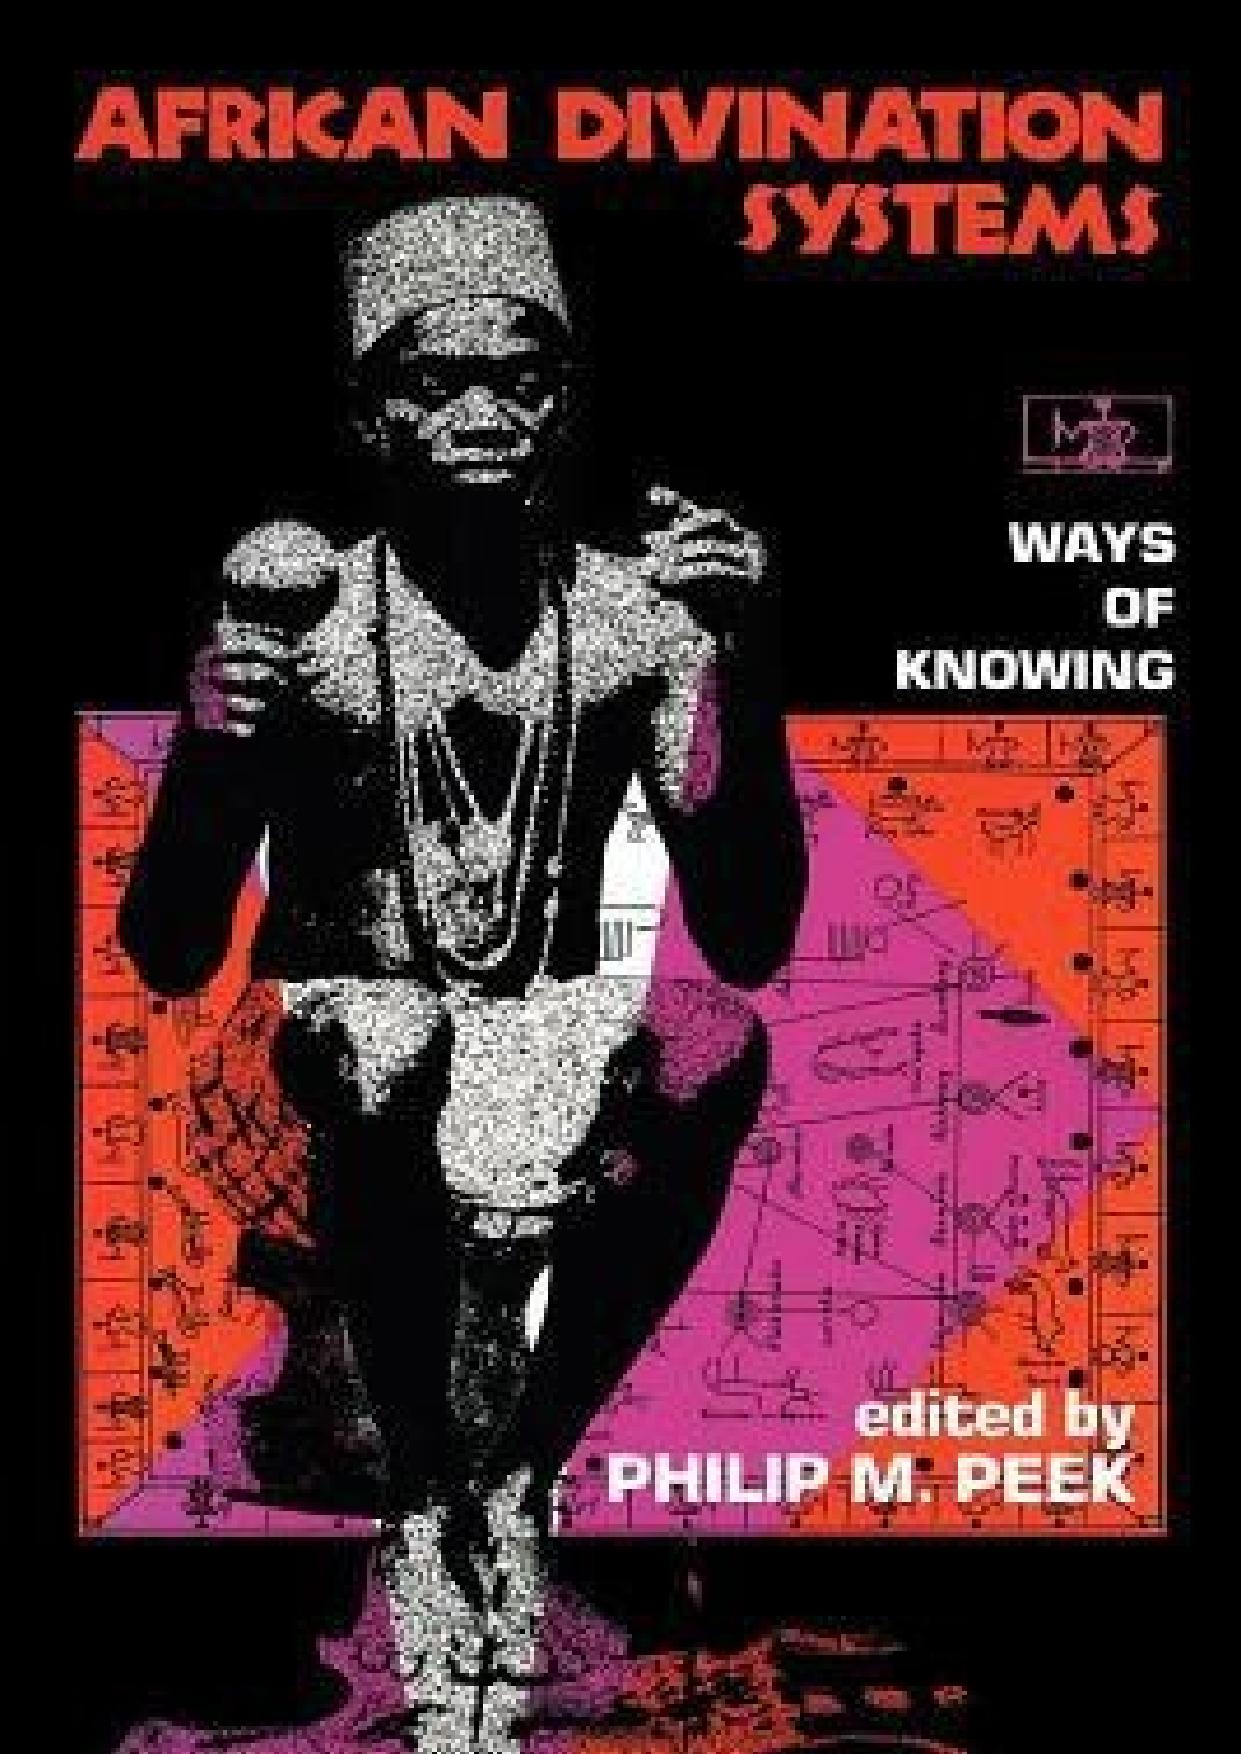 African Divination Systems: Ways of Knowing African Systems of Thought by Philip M. Peek